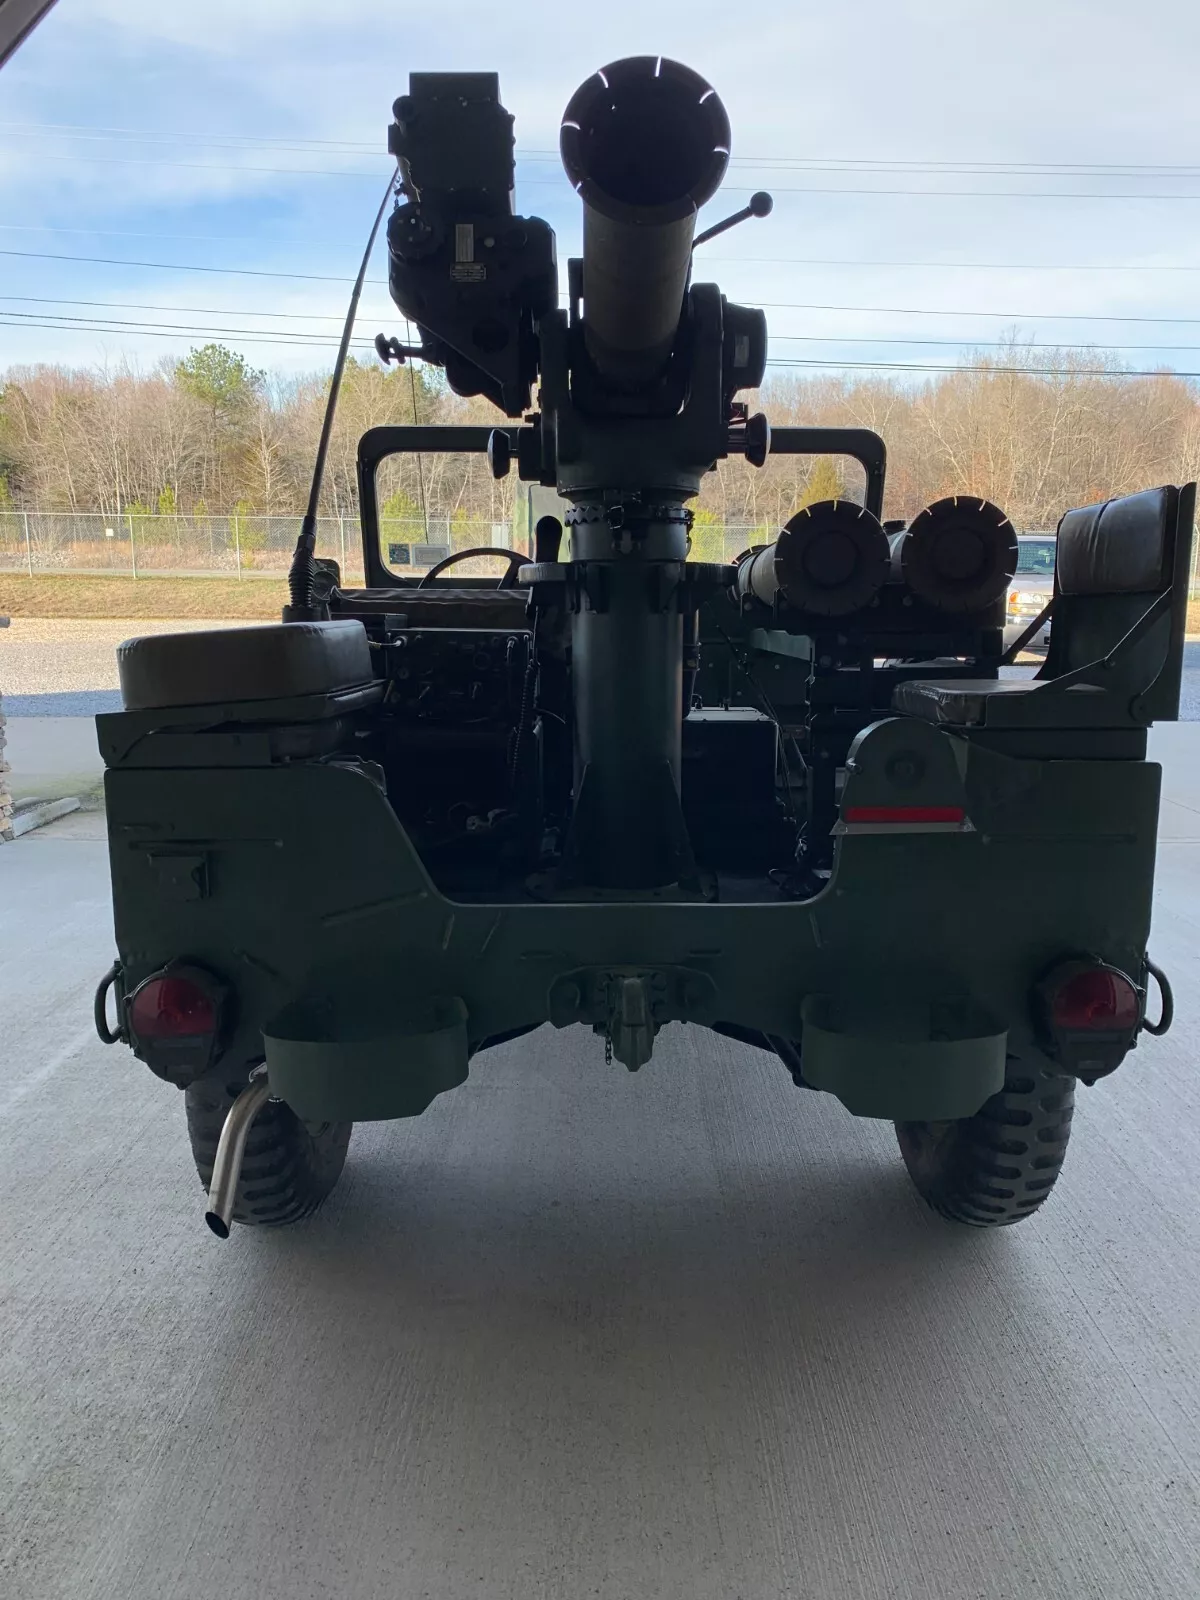 1972 Military M151a2 Tow Jeep